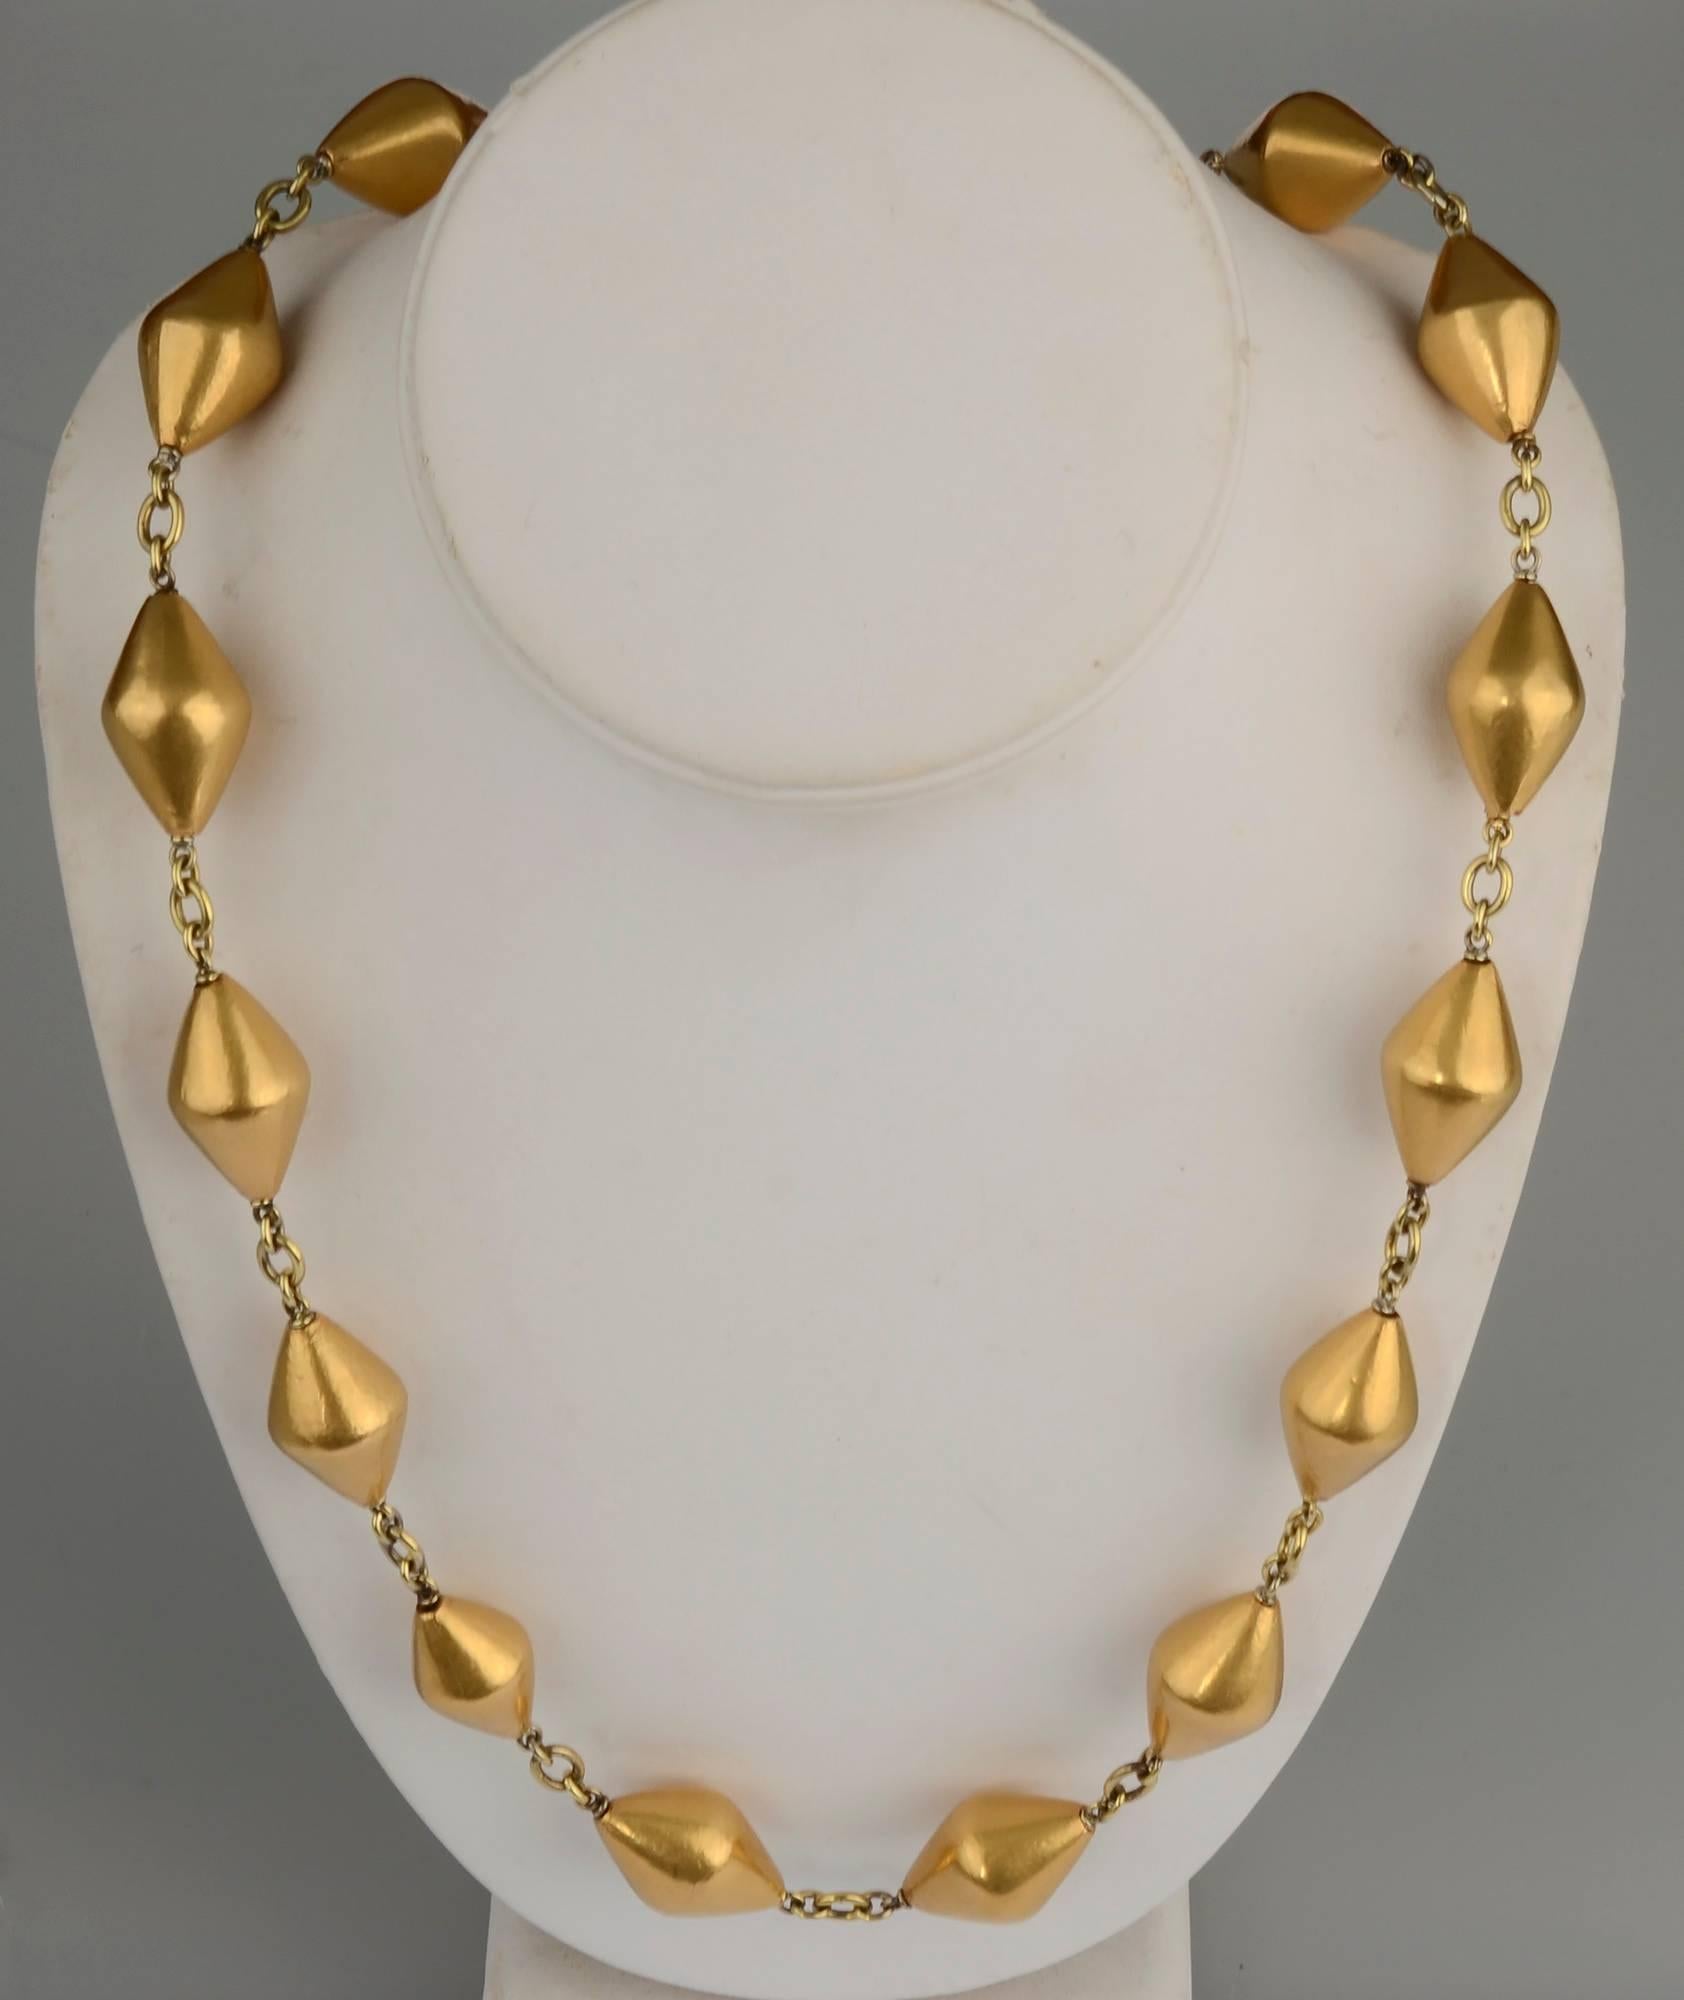 Unusual long chain necklace of 18 karat gold by Sylva et Cie. The 32 inch necklace is made of 20 rhombus shaped beads connected with round and oval links. It has a beautiful detailed clasp with floral patterning. 